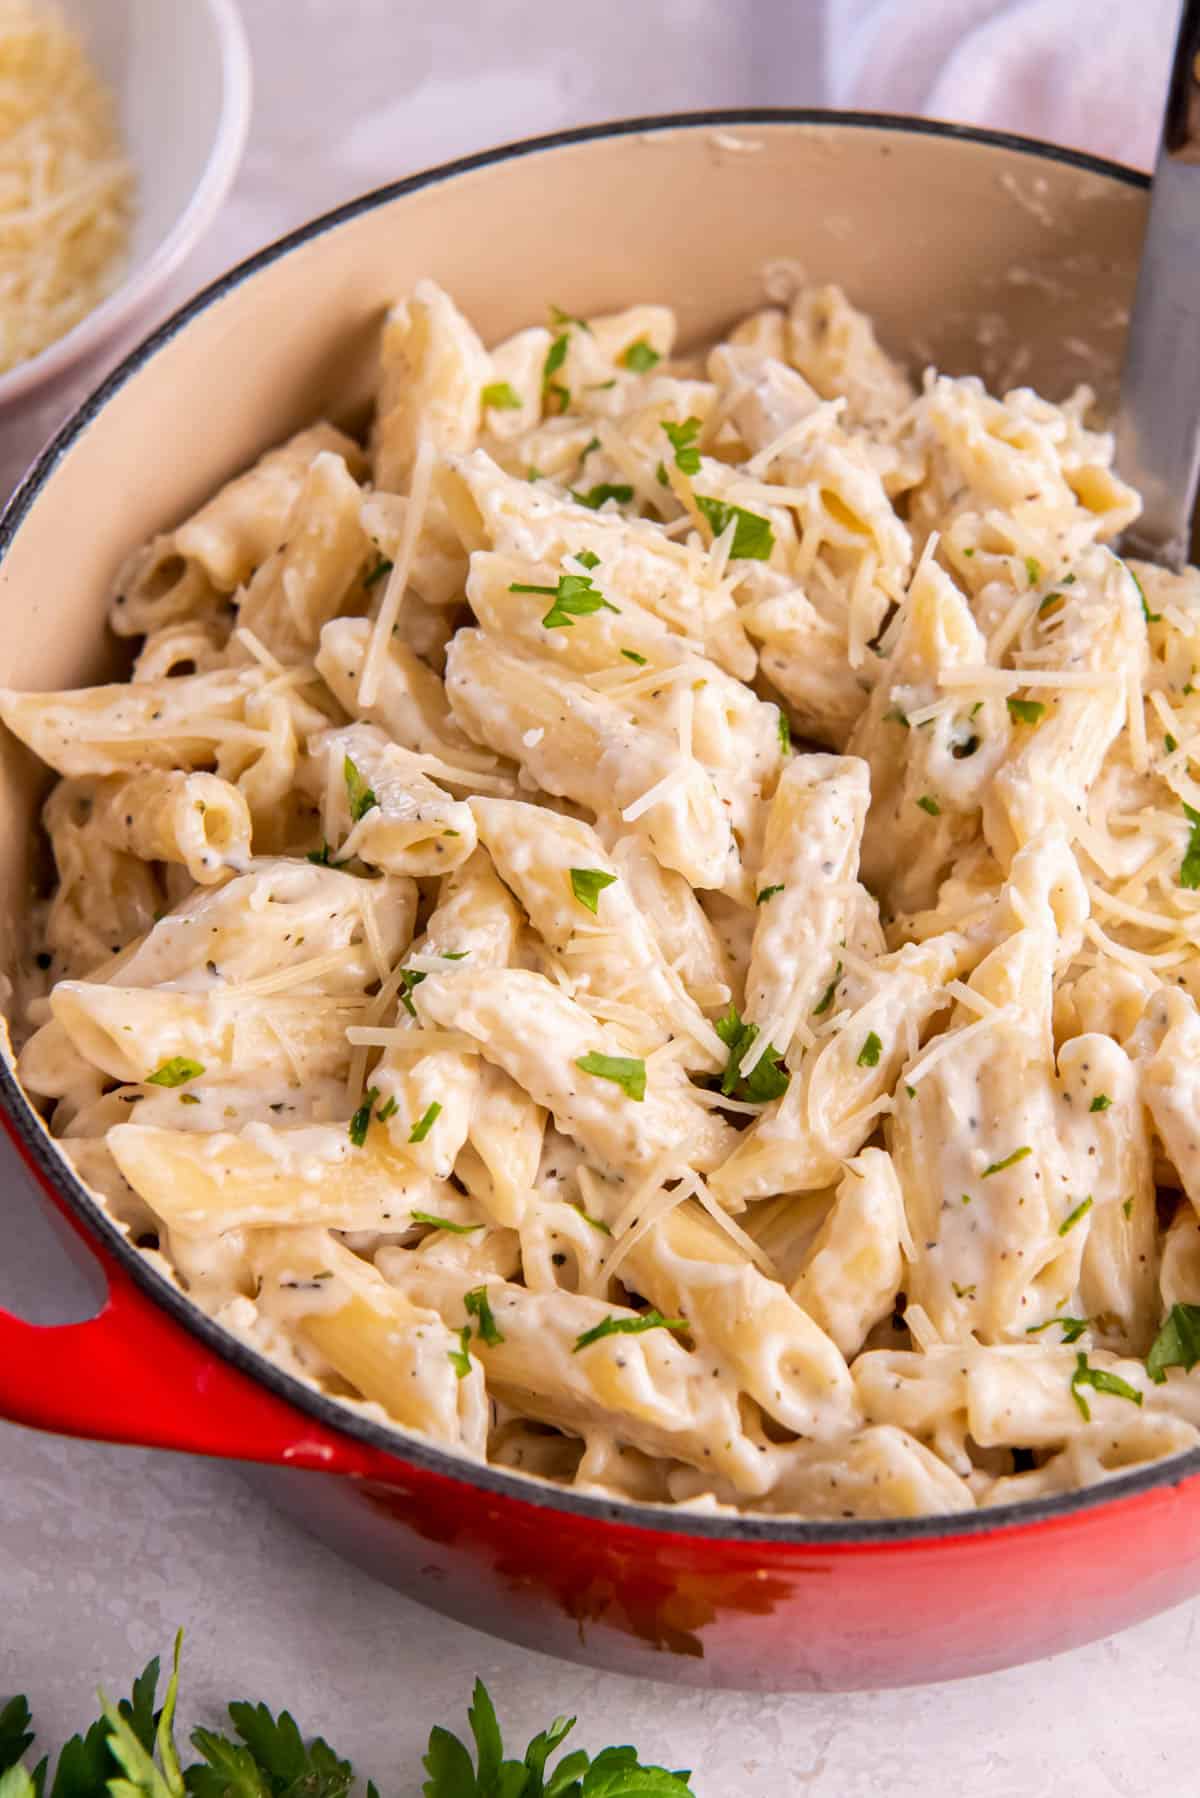 Alfredo penne pasta in a large pasta pan ready for serving. Freshly shredded Parmesan cheese is on top with freshly chopped parsley.